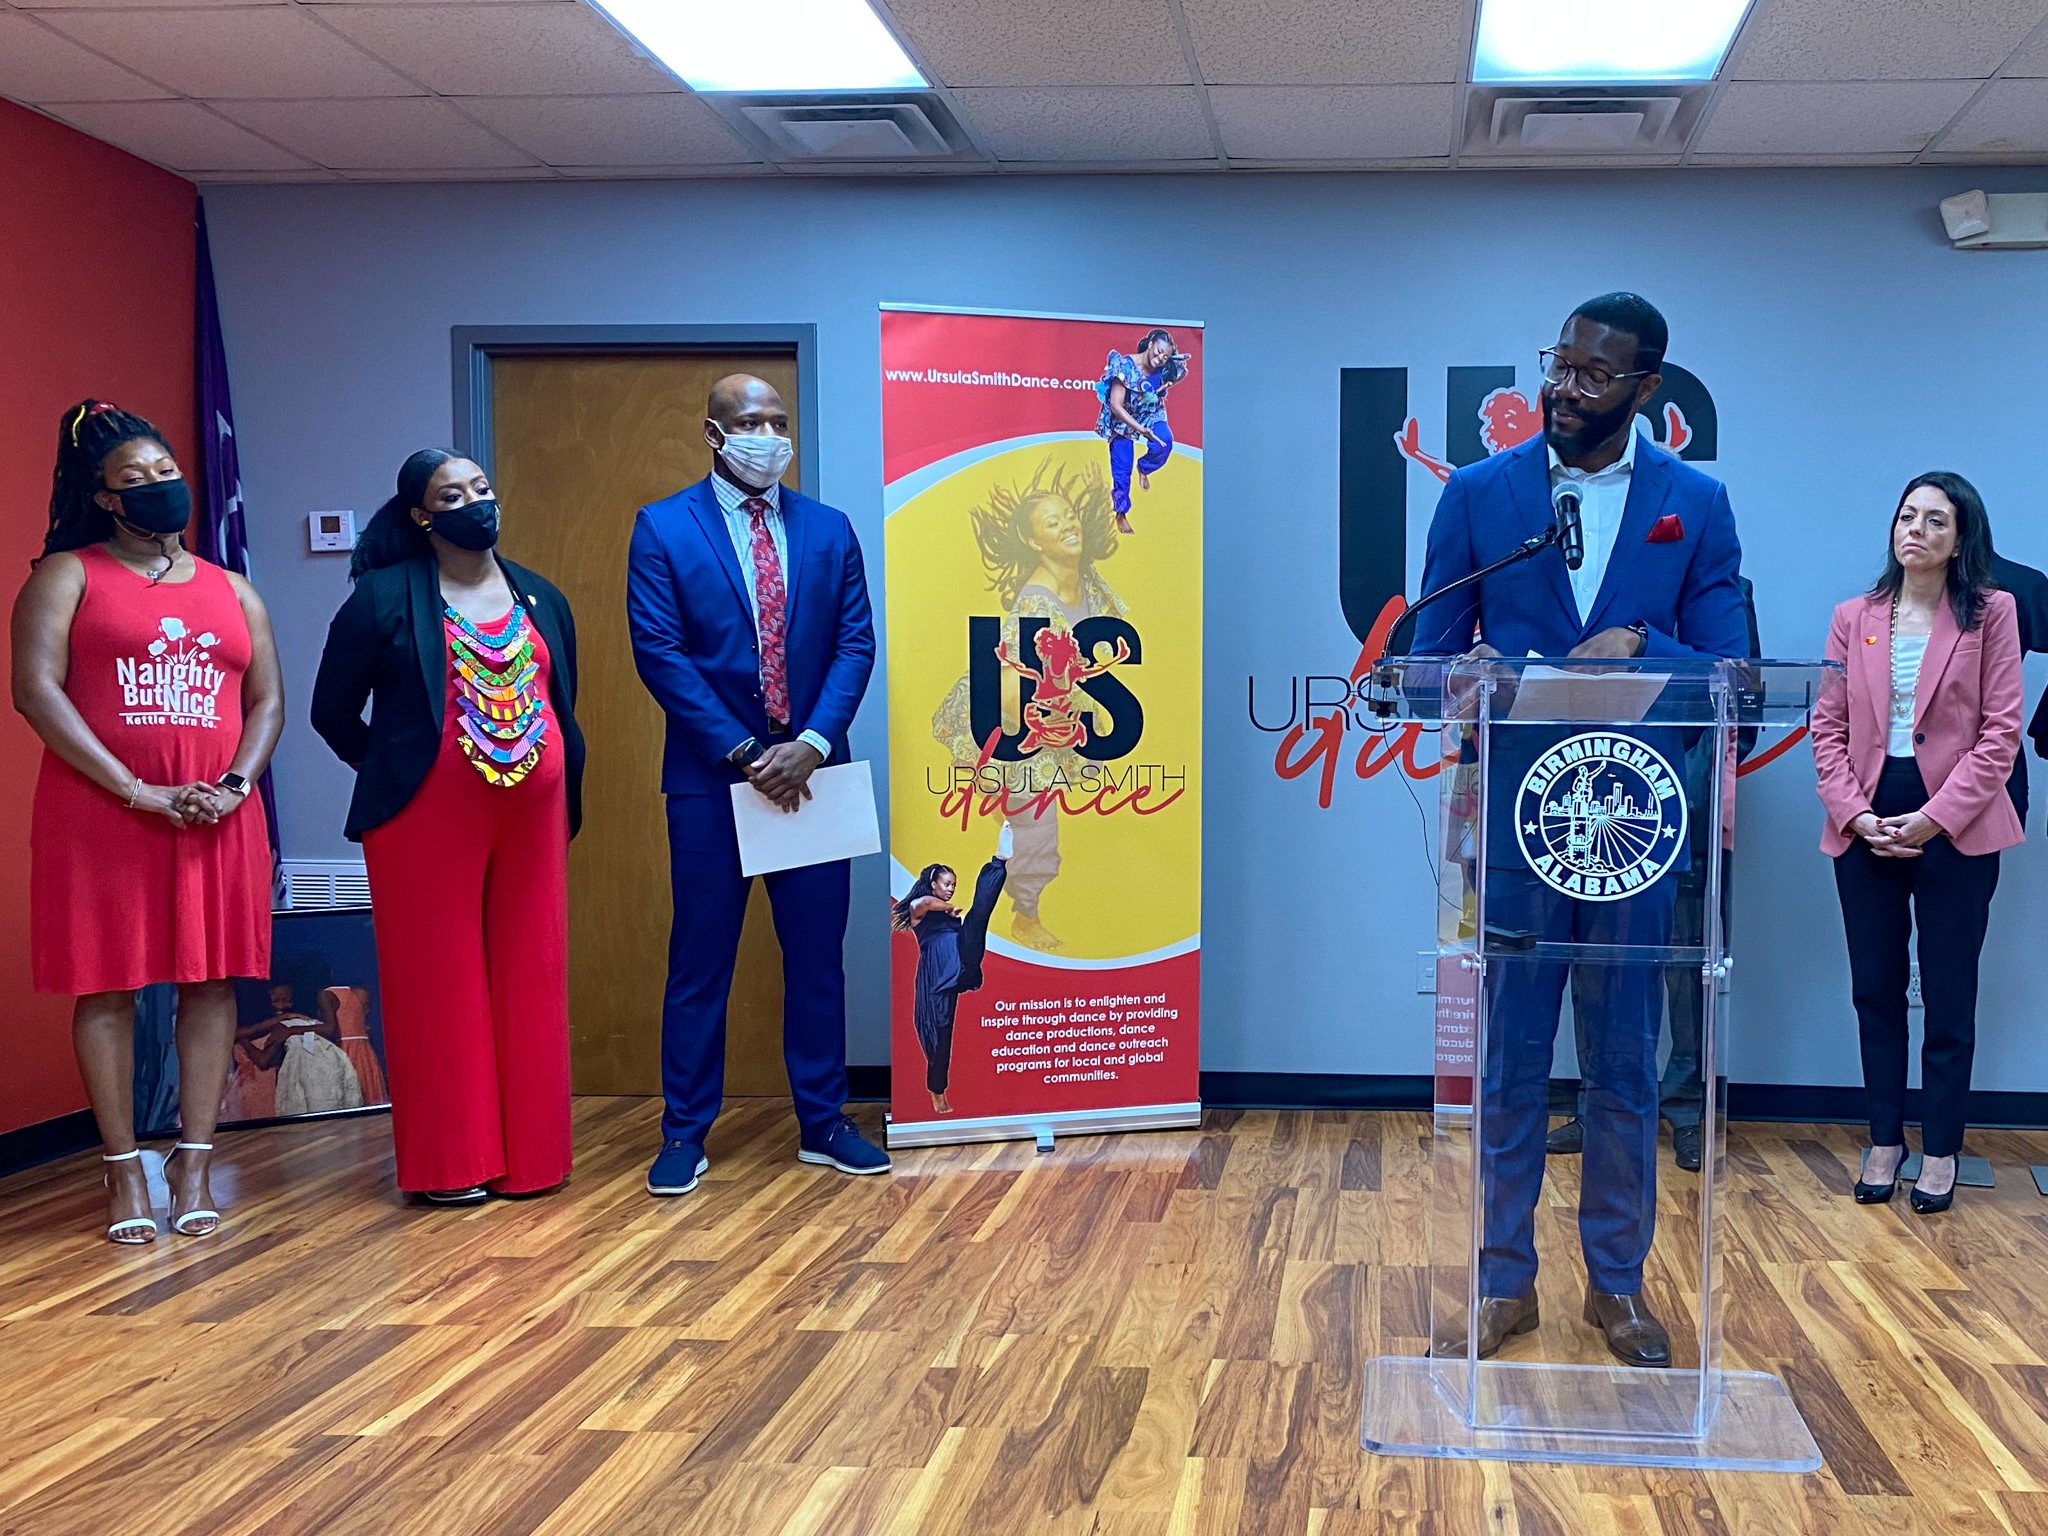 Mayor Woodfin is excited about Mastercard's efforts to revitalize Birmingham. Photo via Tira Davis for Bham Now